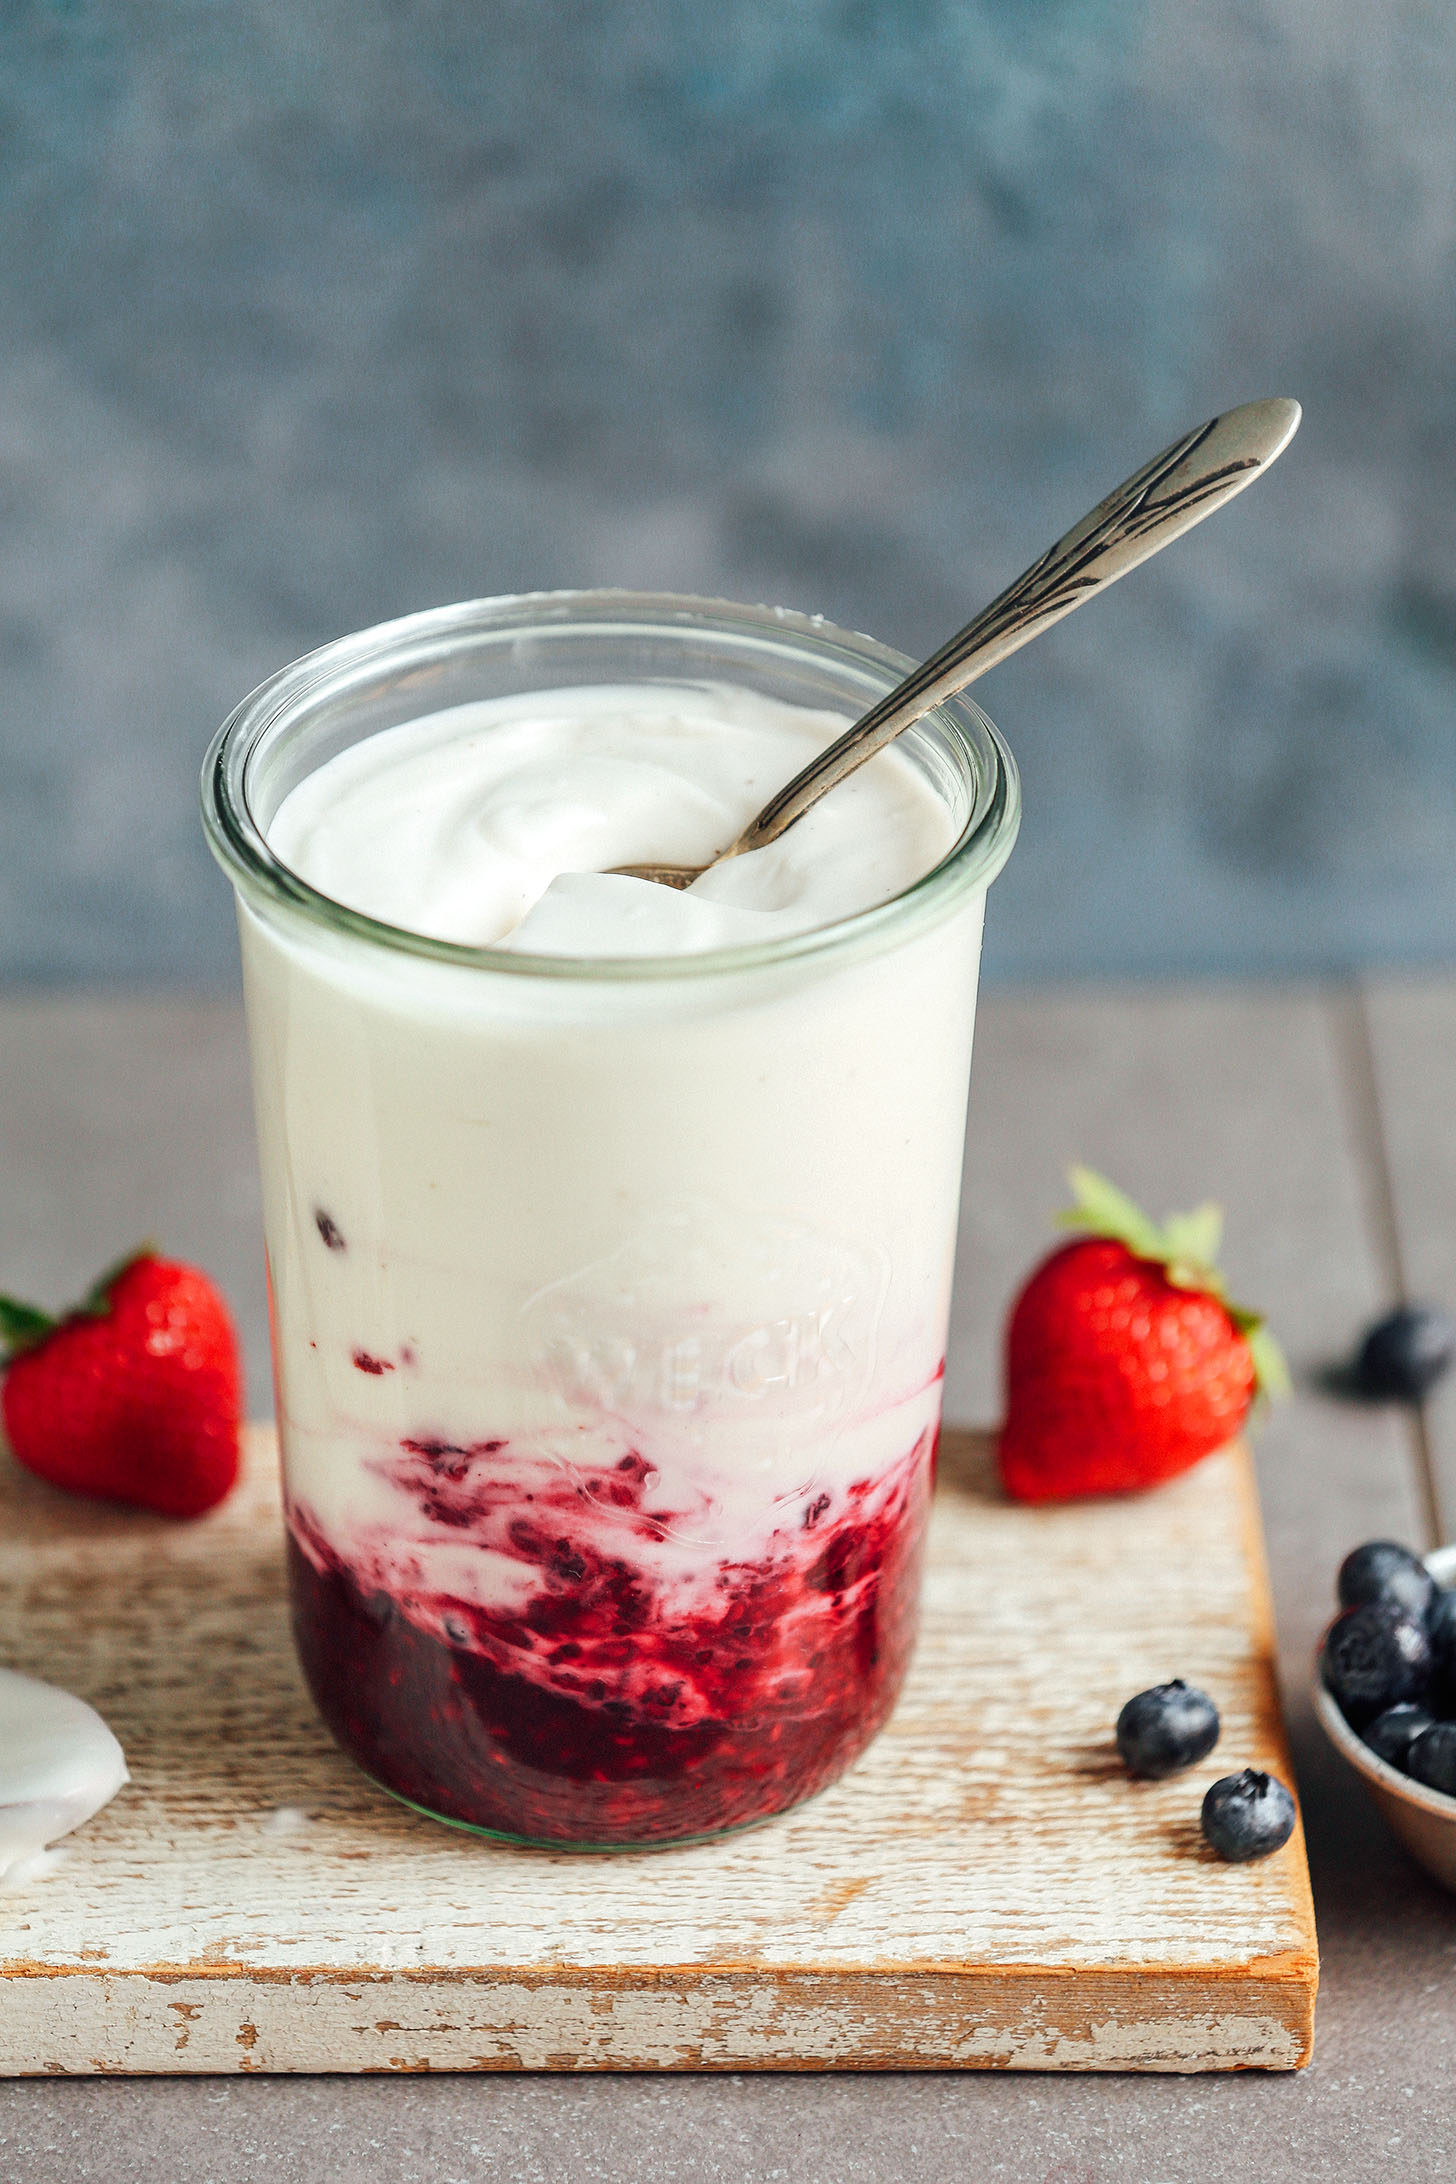 Large Weck jar filled with amazing 2-Ingredient homemade Coconut Yogurt and berry compote